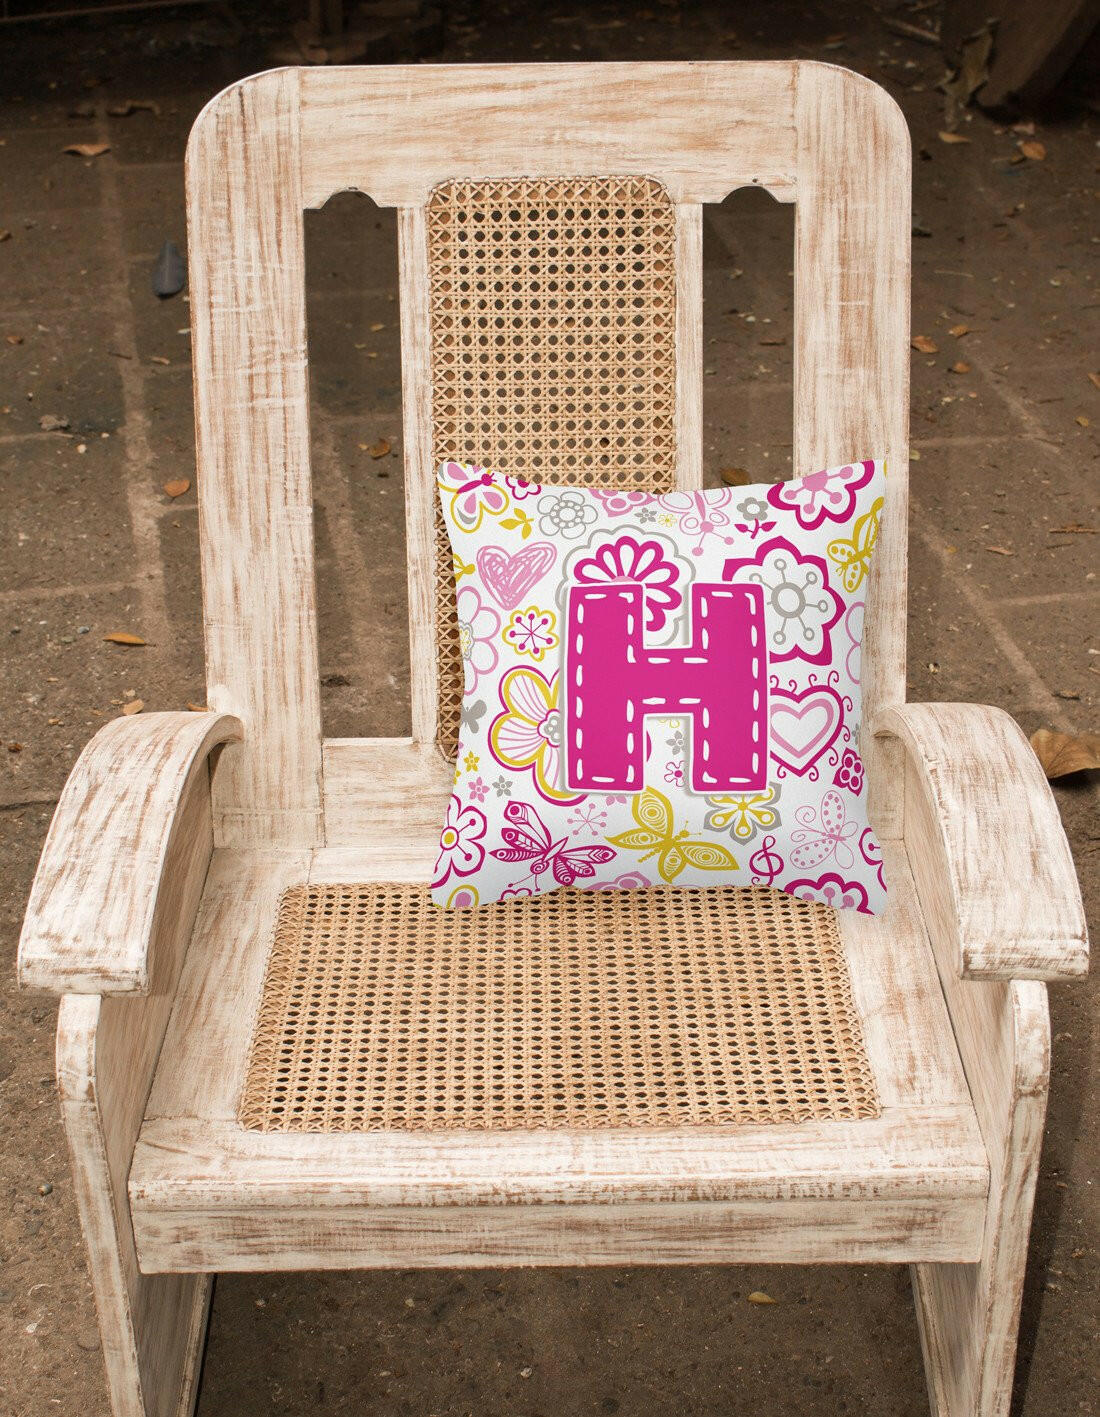 Letter H Flowers and Butterflies Pink Canvas Fabric Decorative Pillow CJ2005-HPW1414 by Caroline's Treasures